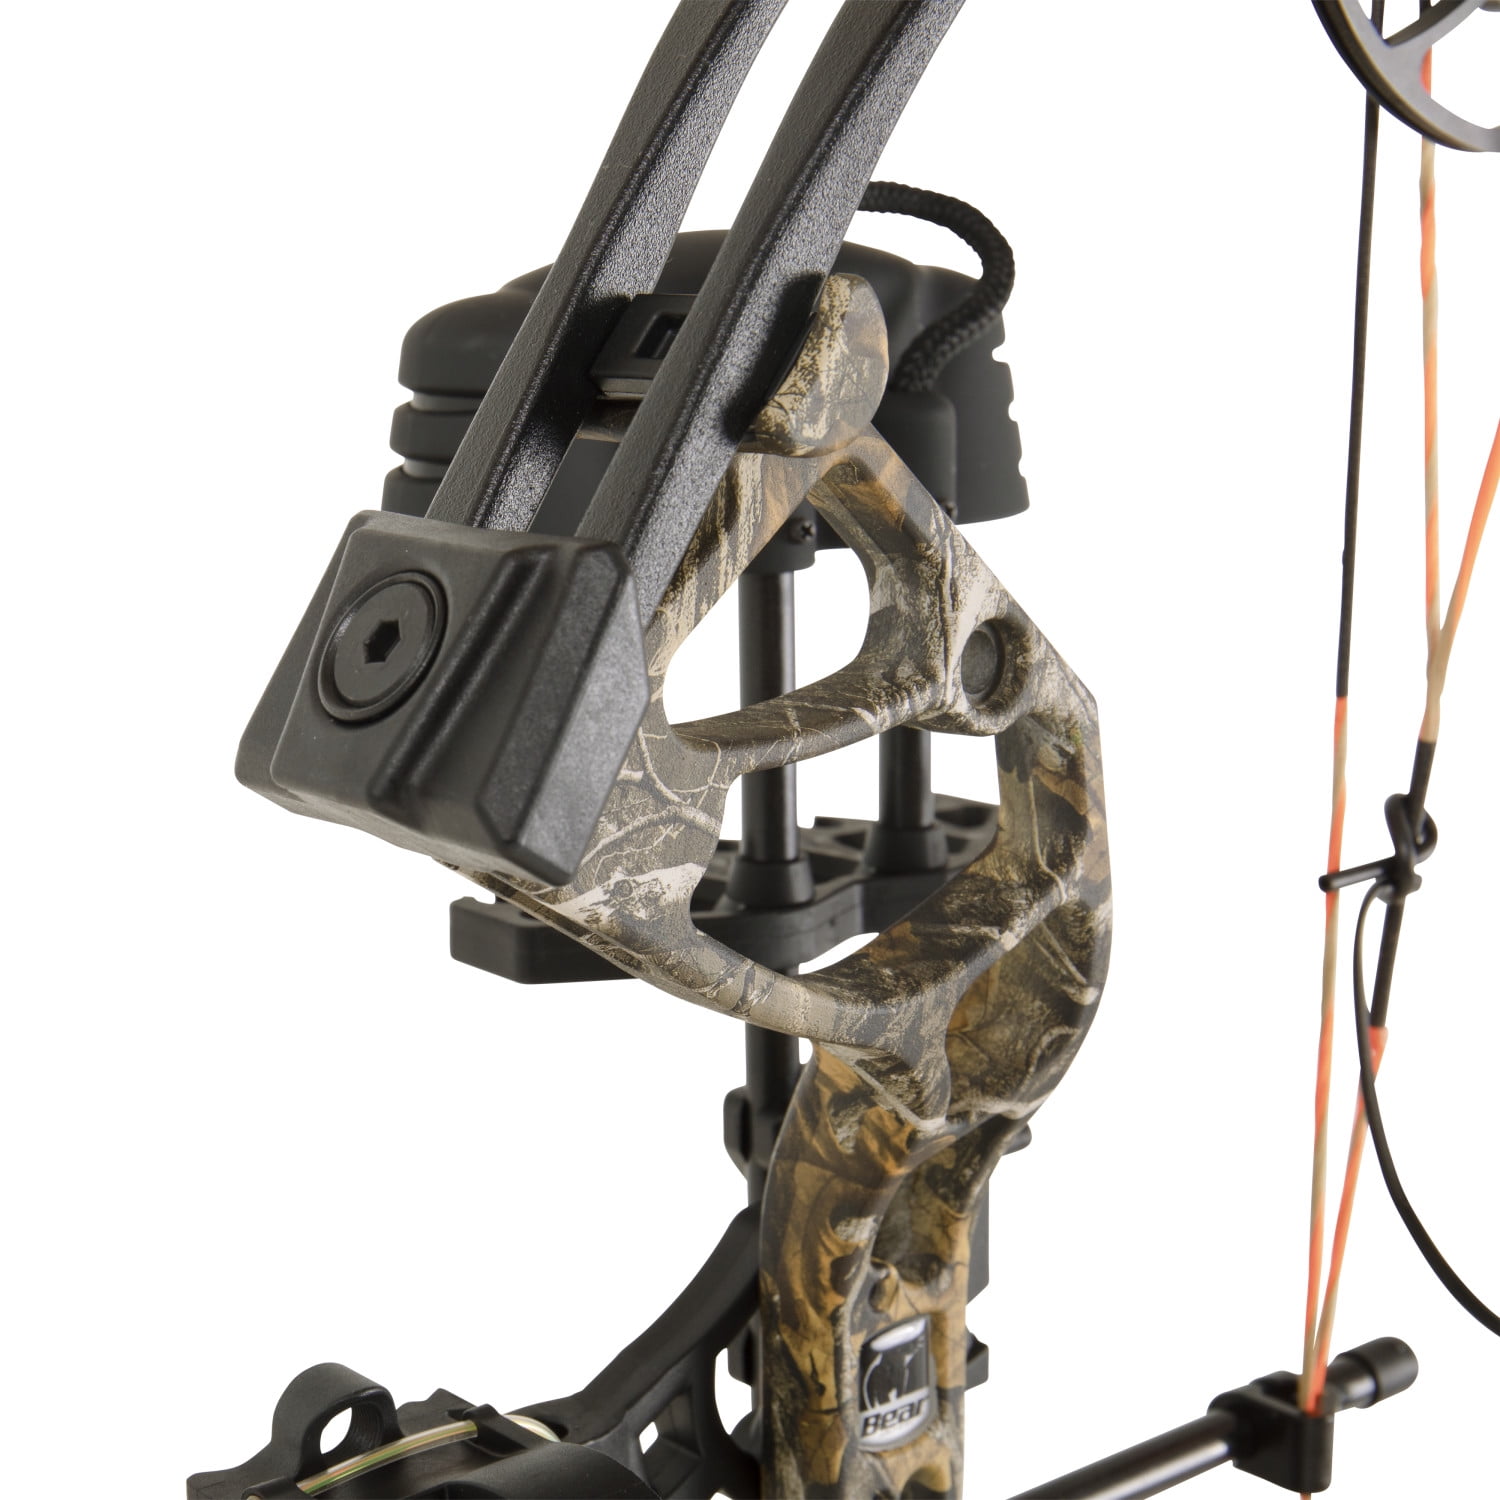 No Press Needed Bear Archery Royale Youth Compound Bow with 5-50 lbs Draw Weight Adjustment and 12-27 in Draw Length Adjustment 